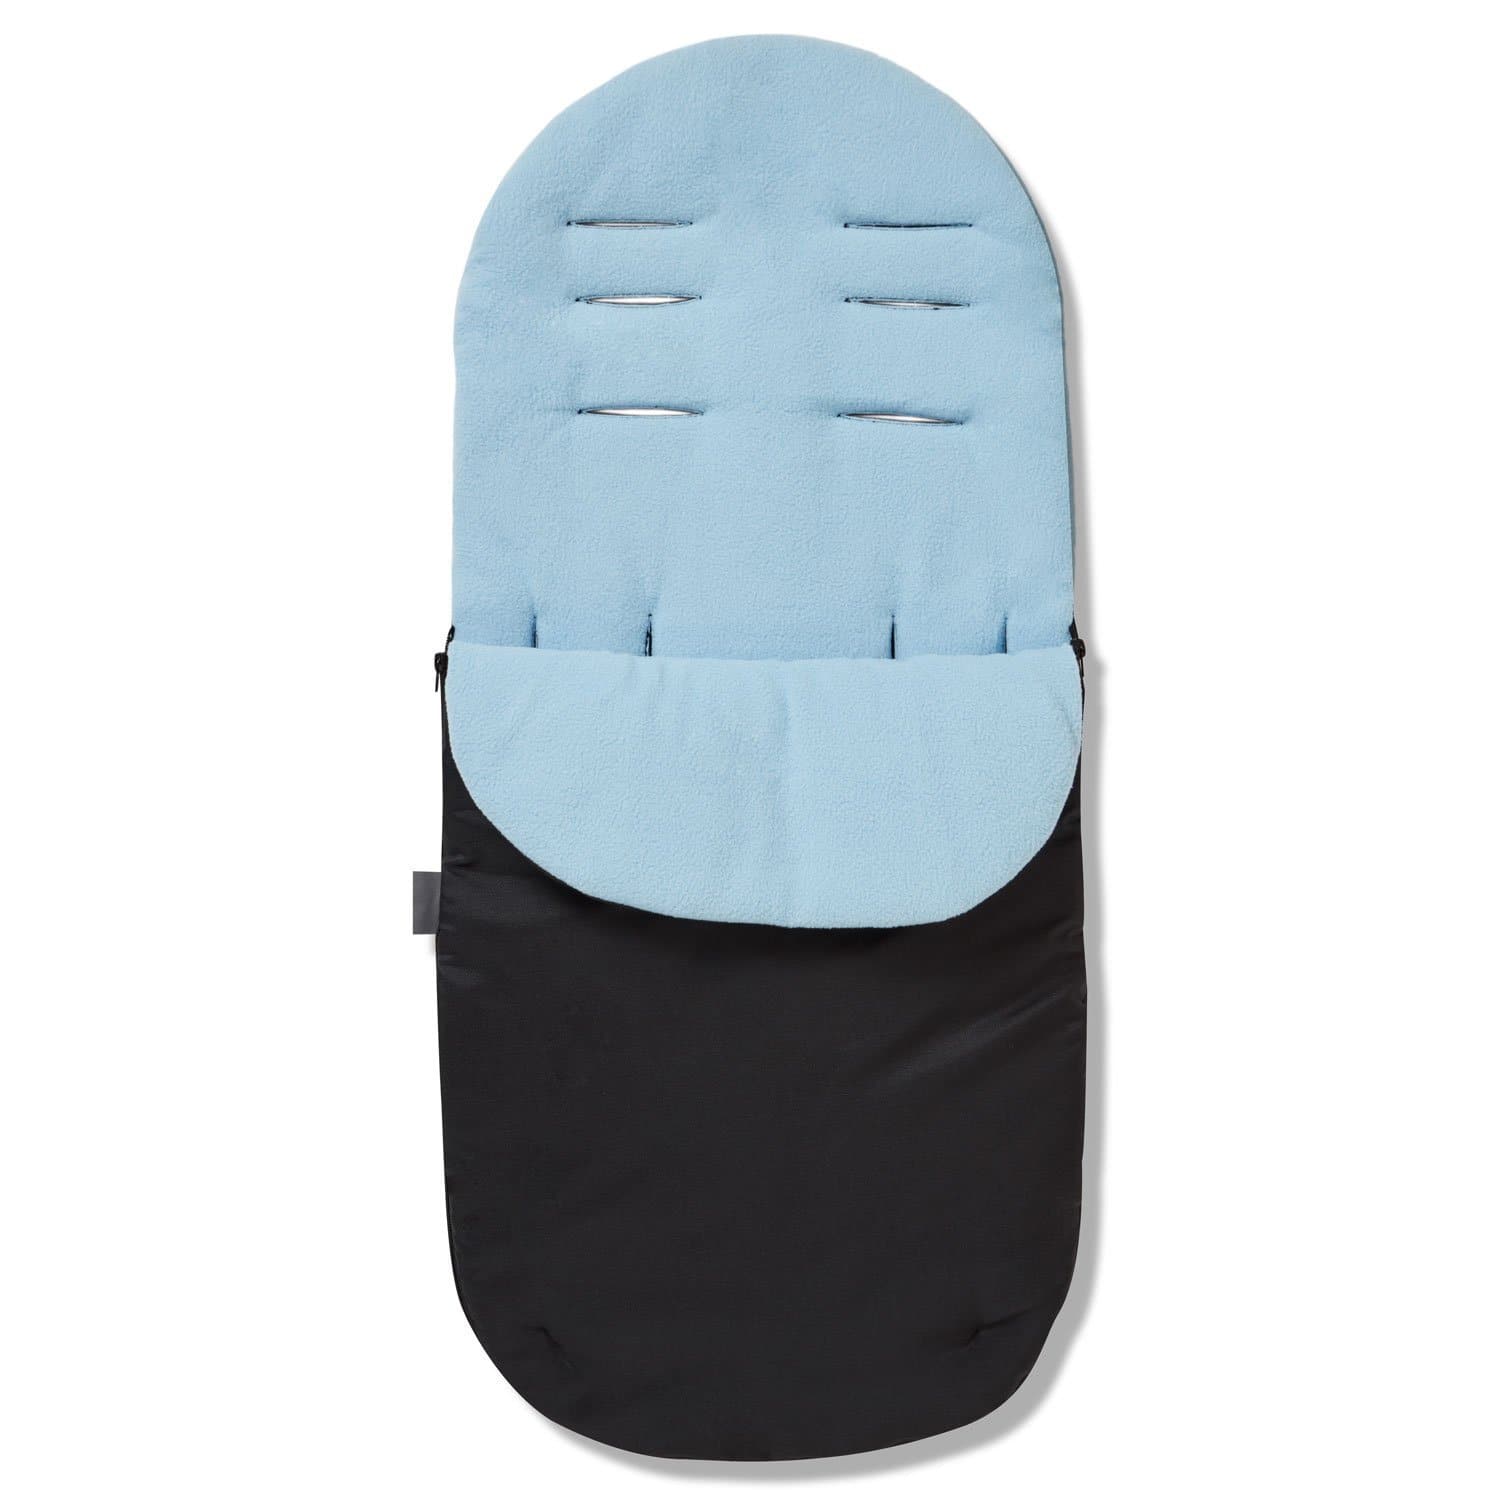 Footmuff / Cosy Toes Compatible with Maxi Cosi - Light Blue / Fits All Models | For Your Little One